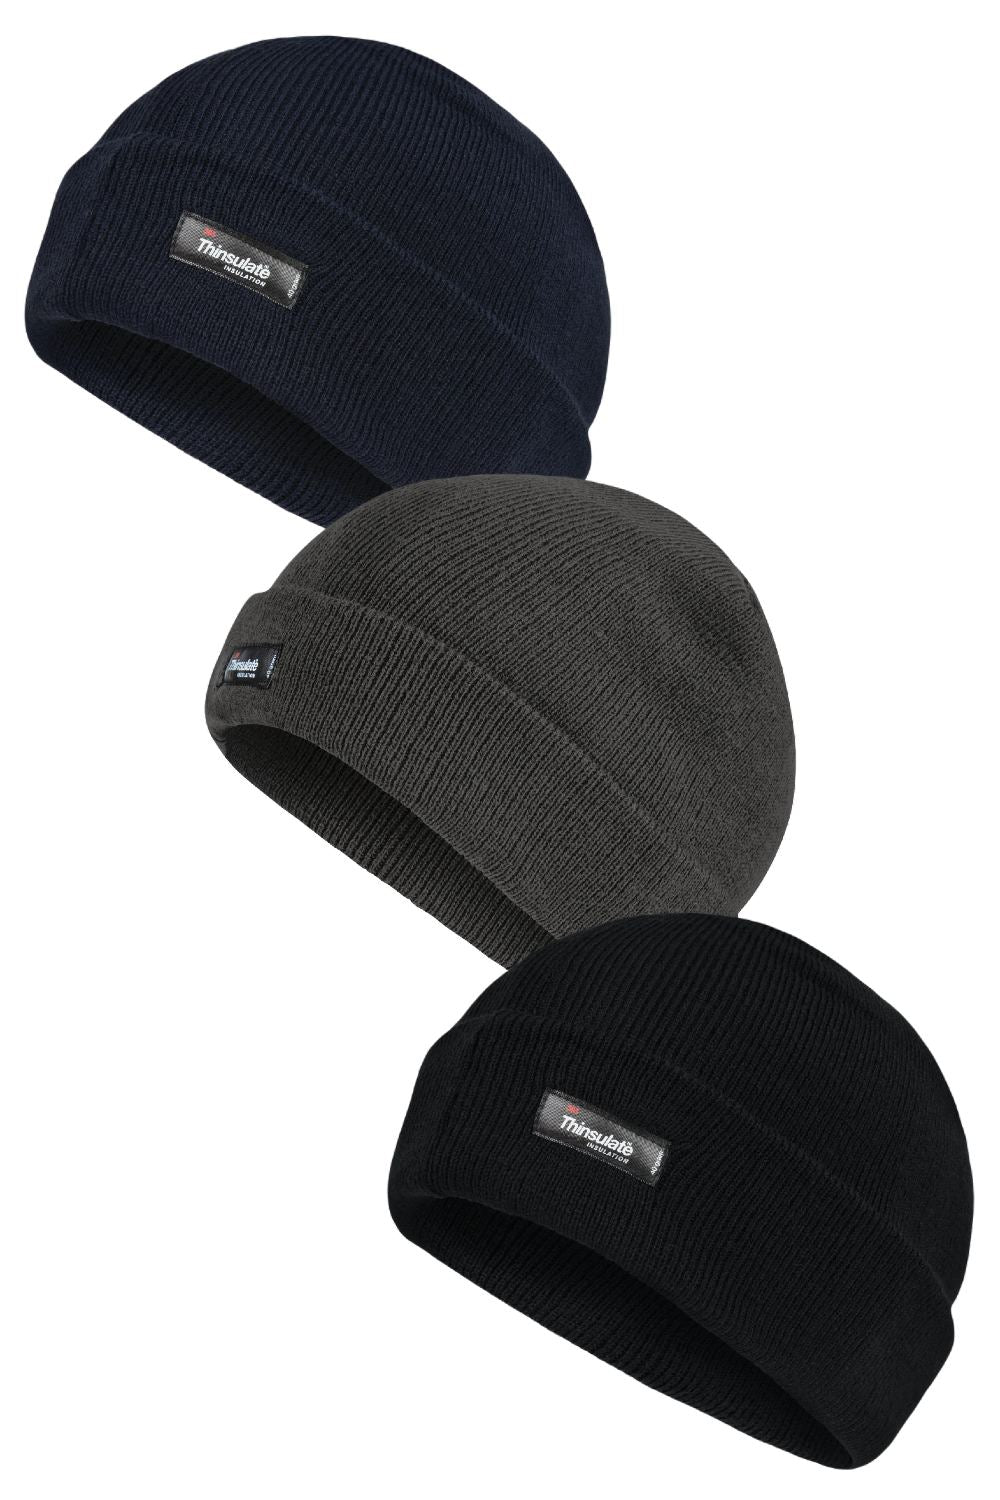 Regatta Thinsulate Acrylic Hat Navy, Seal and Black